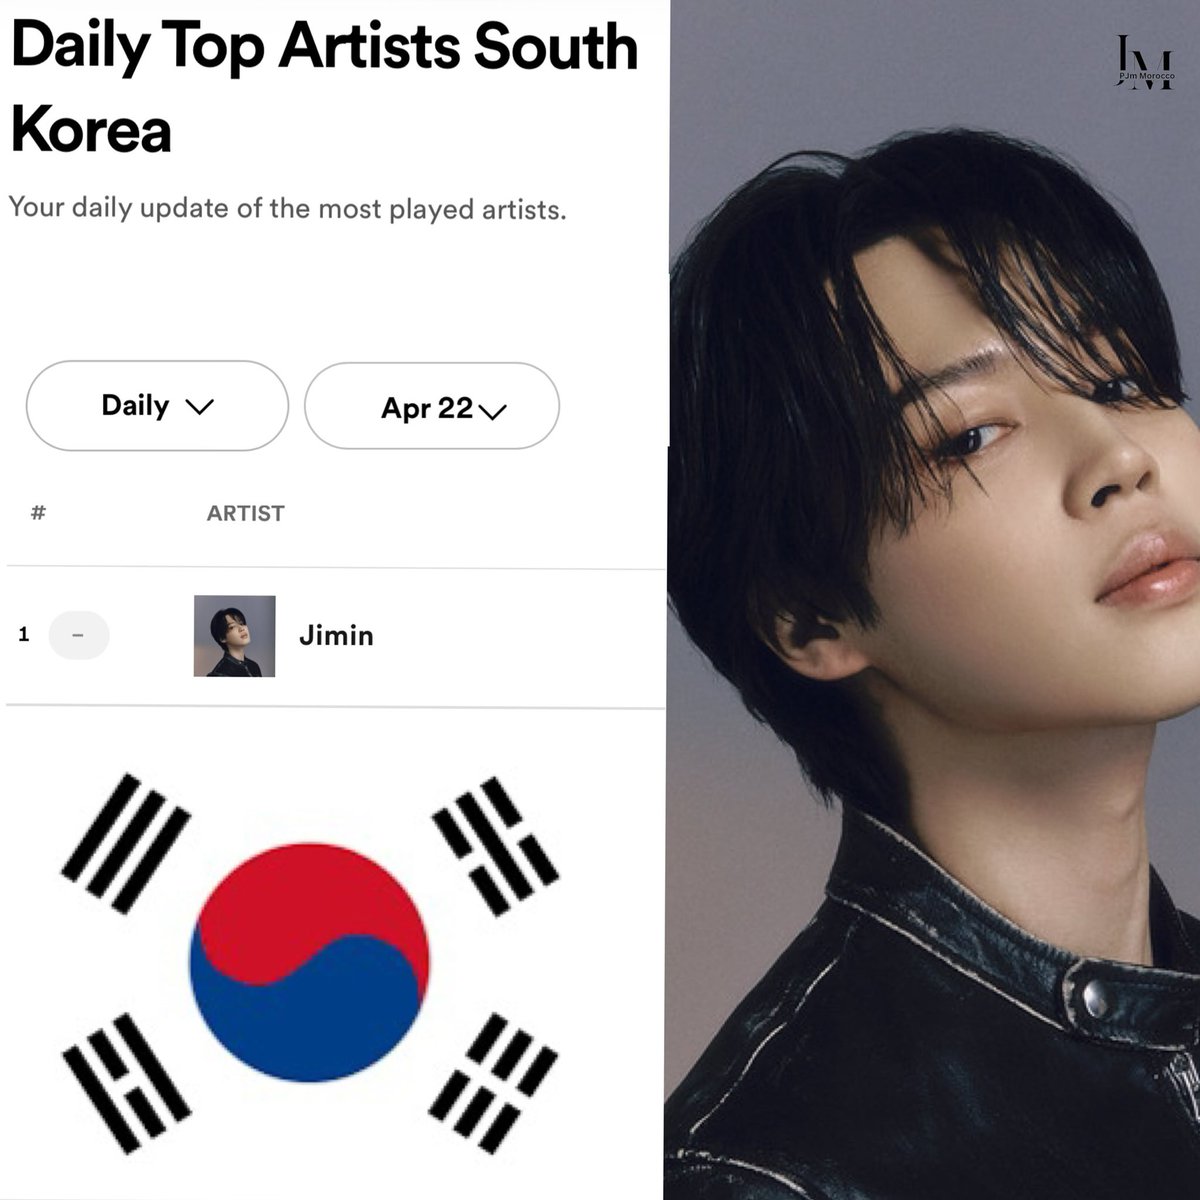 📅 April 22, 2024 🇰🇷 Jimin remains at #1 on Spotify South Korea Daily Top Artists. 

#Jimin extends his record as the Longest #1 Charting Soloist on the chart 288 days 🔥 🫂🥰

CONGRATULATIONS JIMIN 👏 🎊